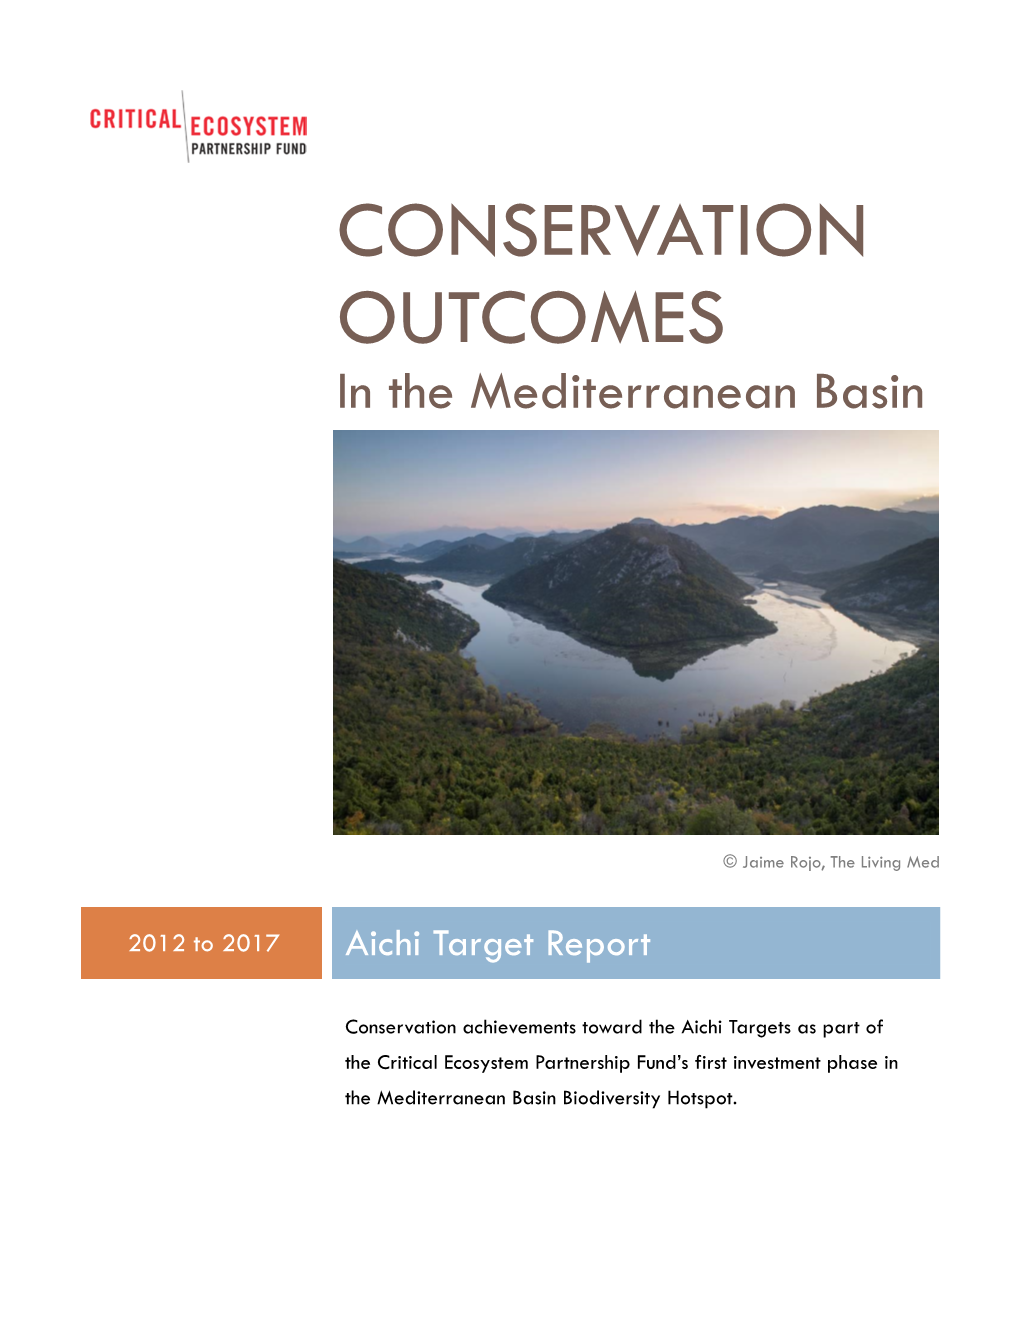 CONSERVATION OUTCOMES in the Mediterranean Basin